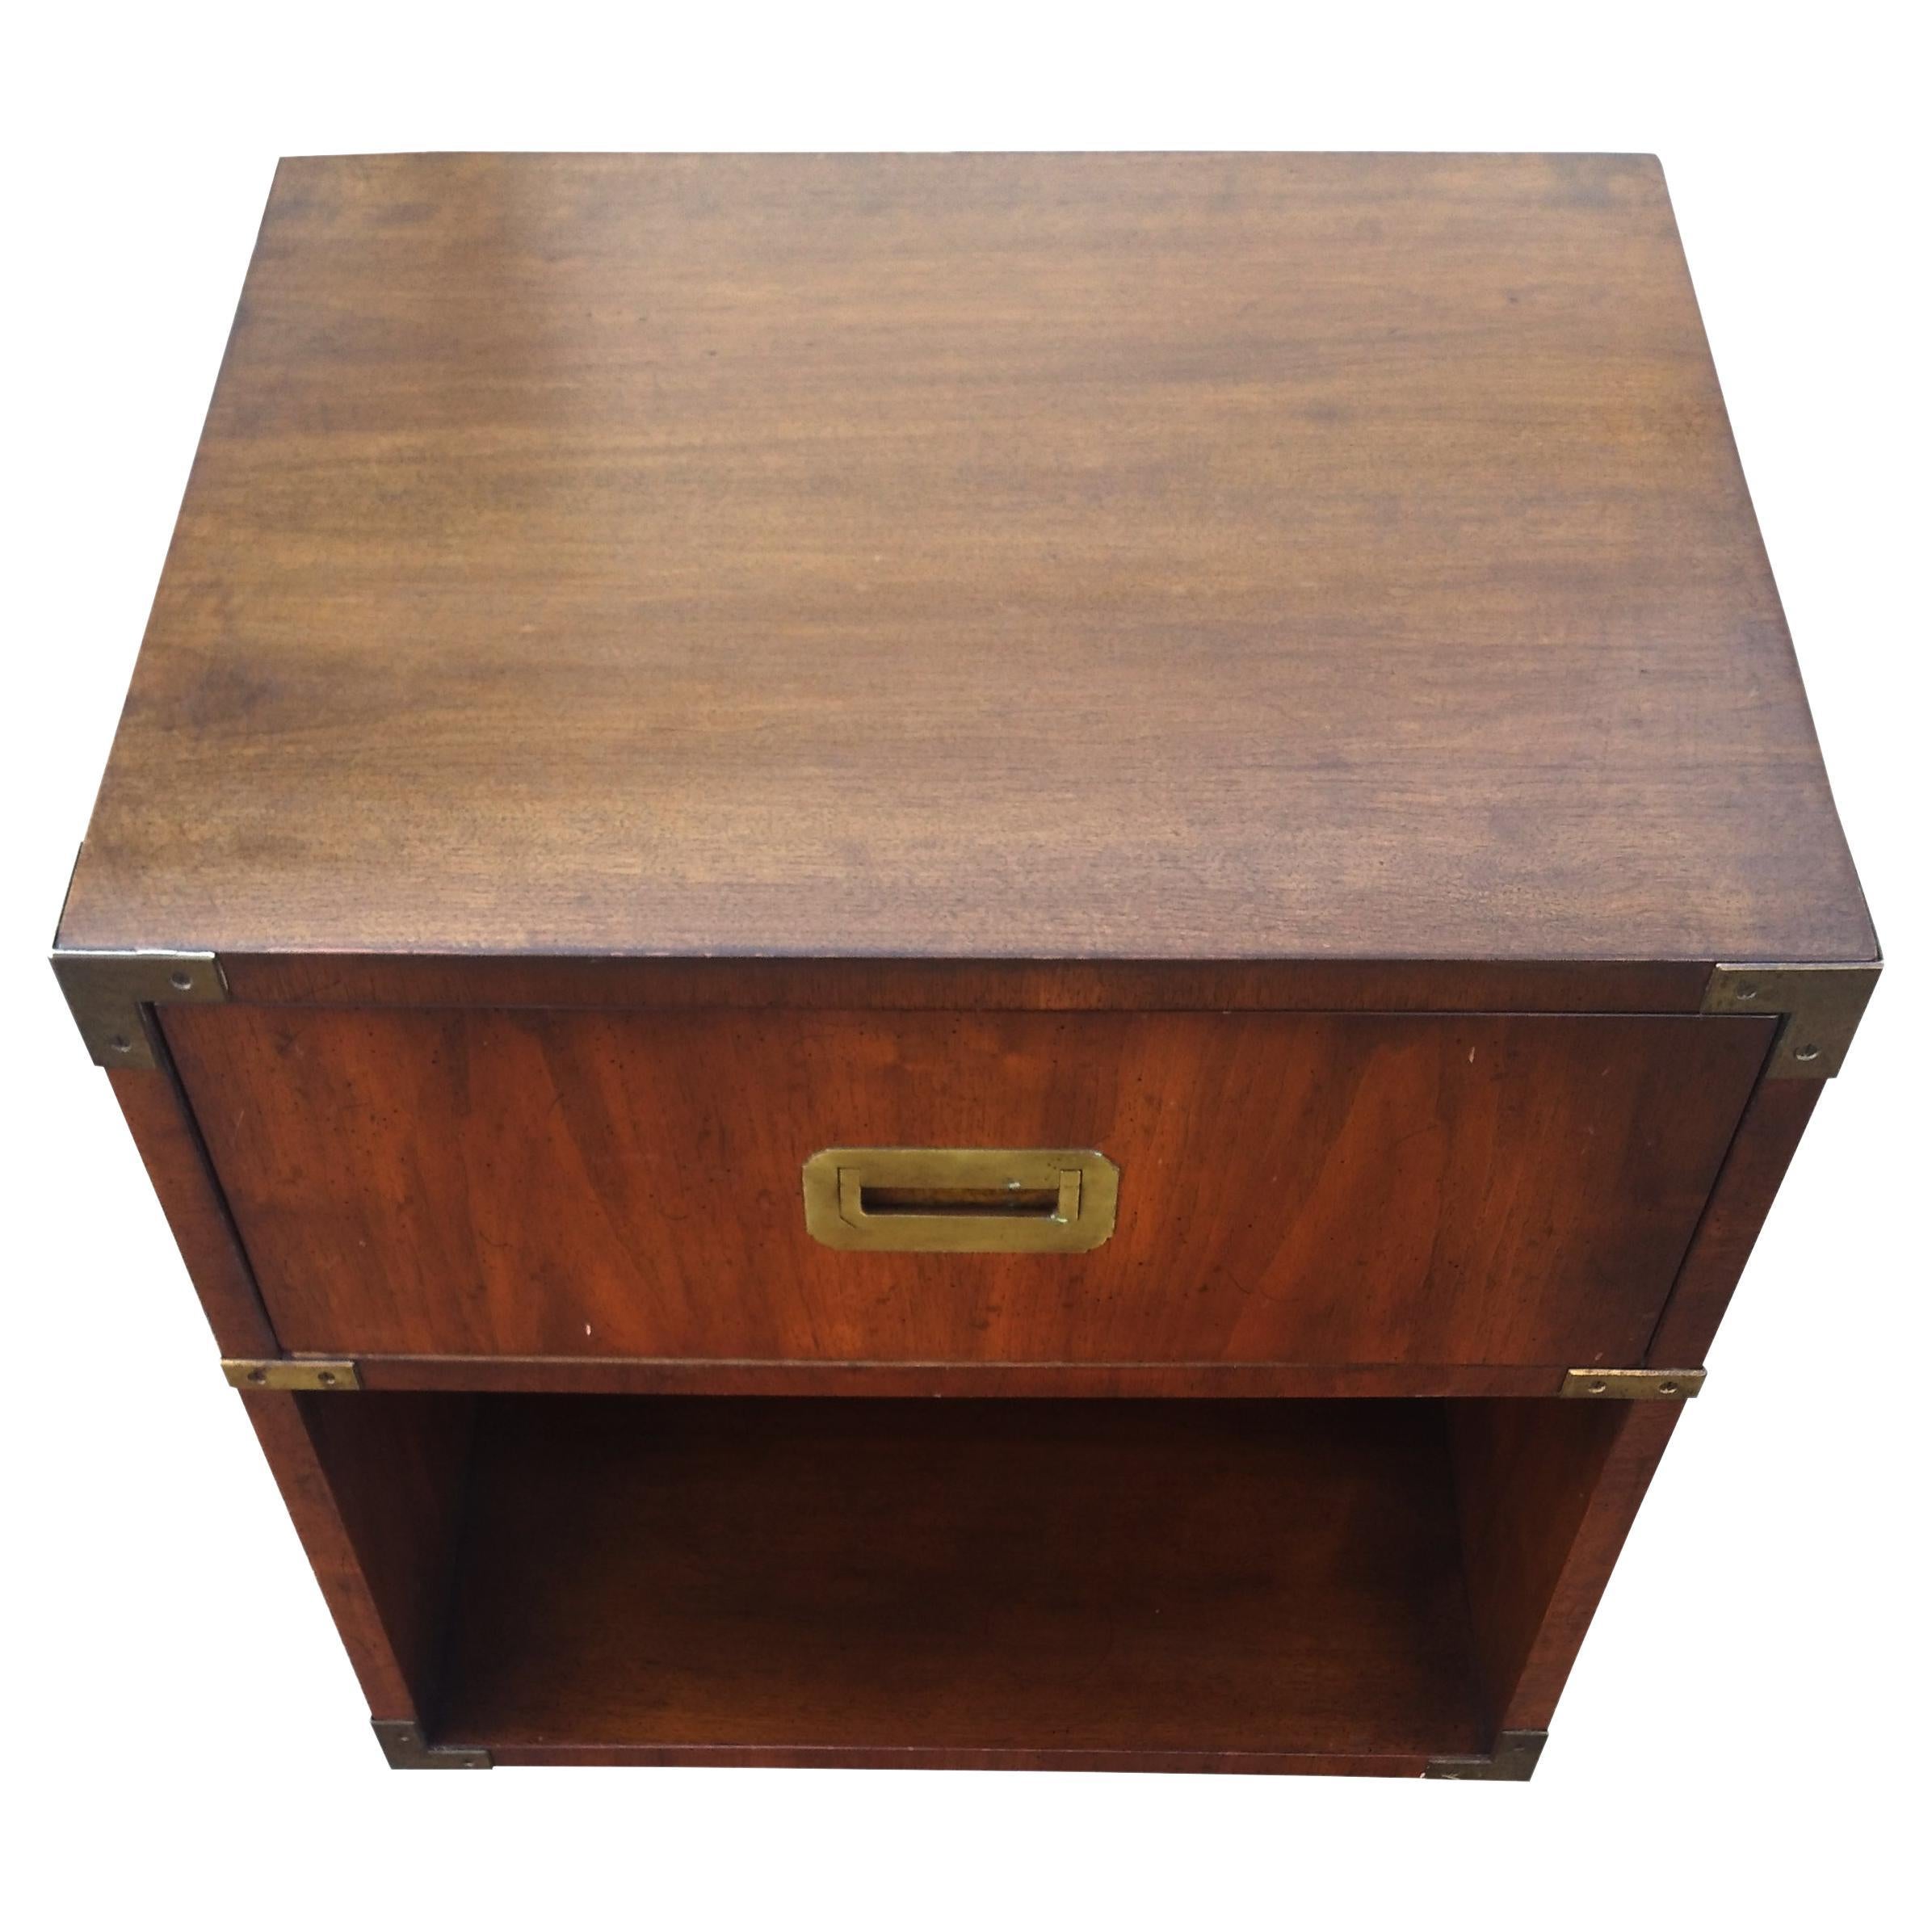 Henredon 22 Campaign Style Walnut Nightstand

Single campaign side table or nightstand. Single drawer with open storage beneath. Walnut with recessed brass pull and details.